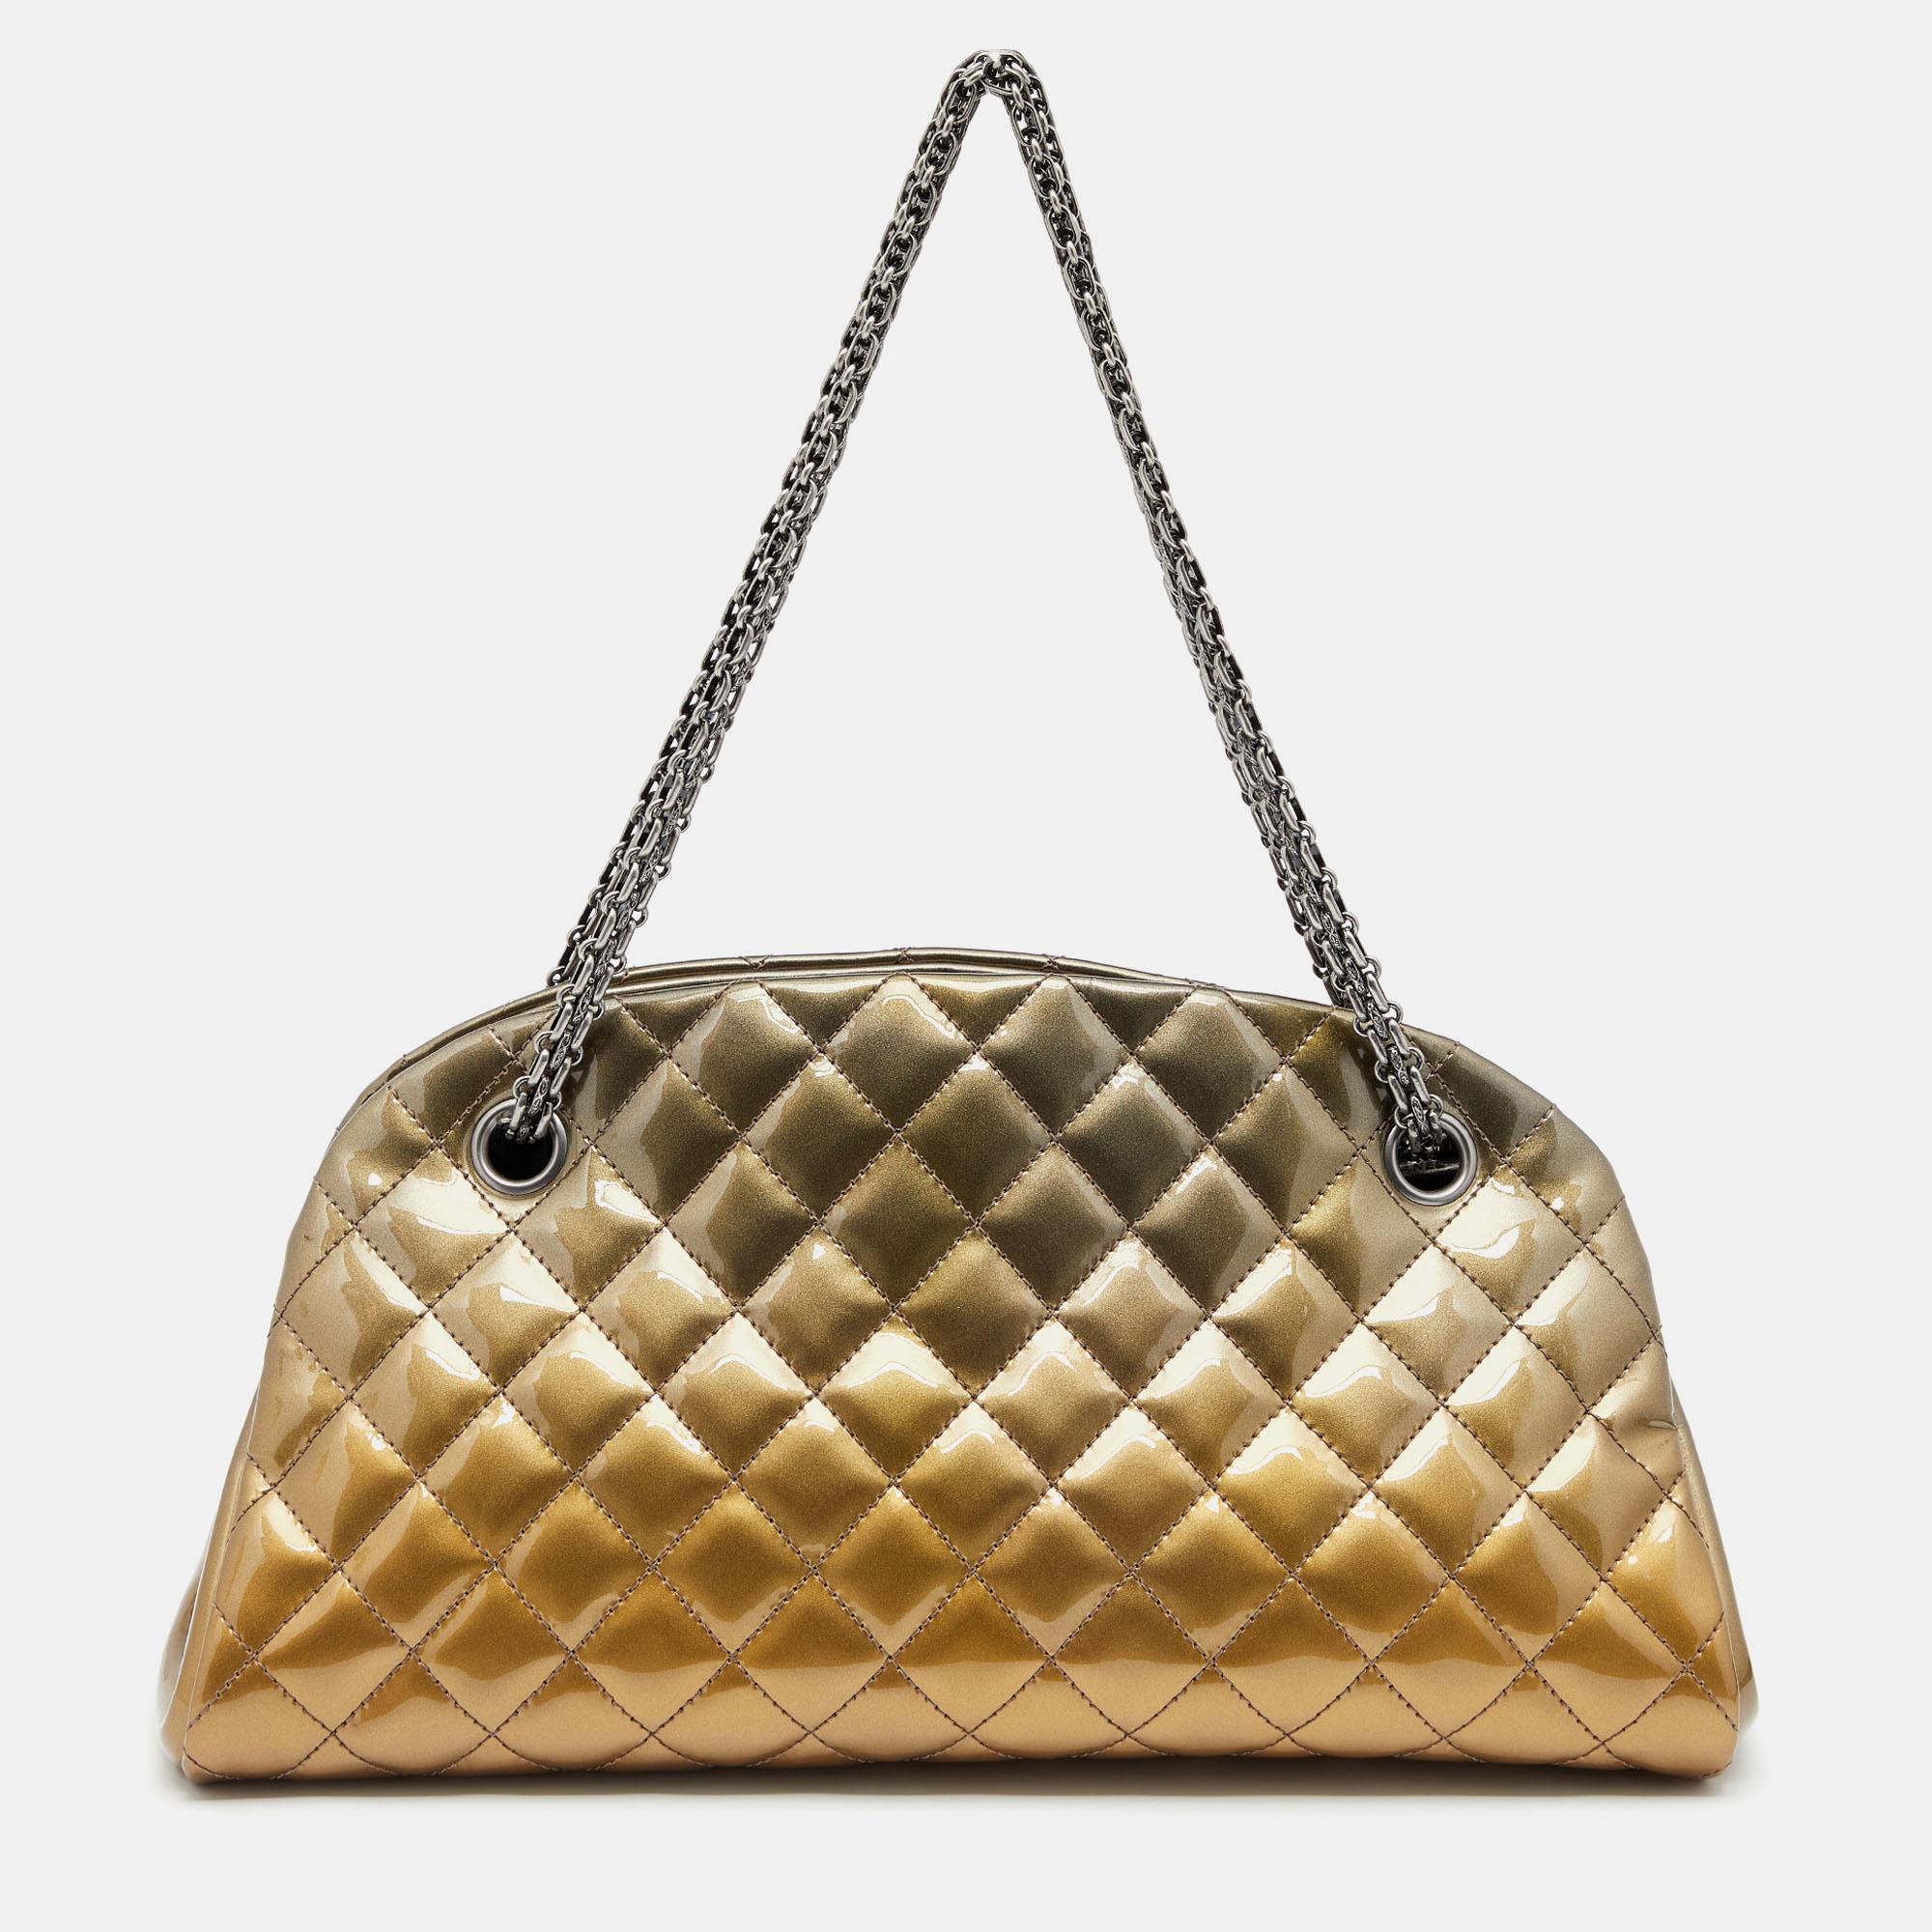 Spacious and lovely, this Just Mademoiselle Bowler bag is from Chanel. It comes crafted from gold ombre patent leather, covered in the signature diamond quilt, and enhanced with dark ruthenium-tone hardware. It is equipped with chain handles and a